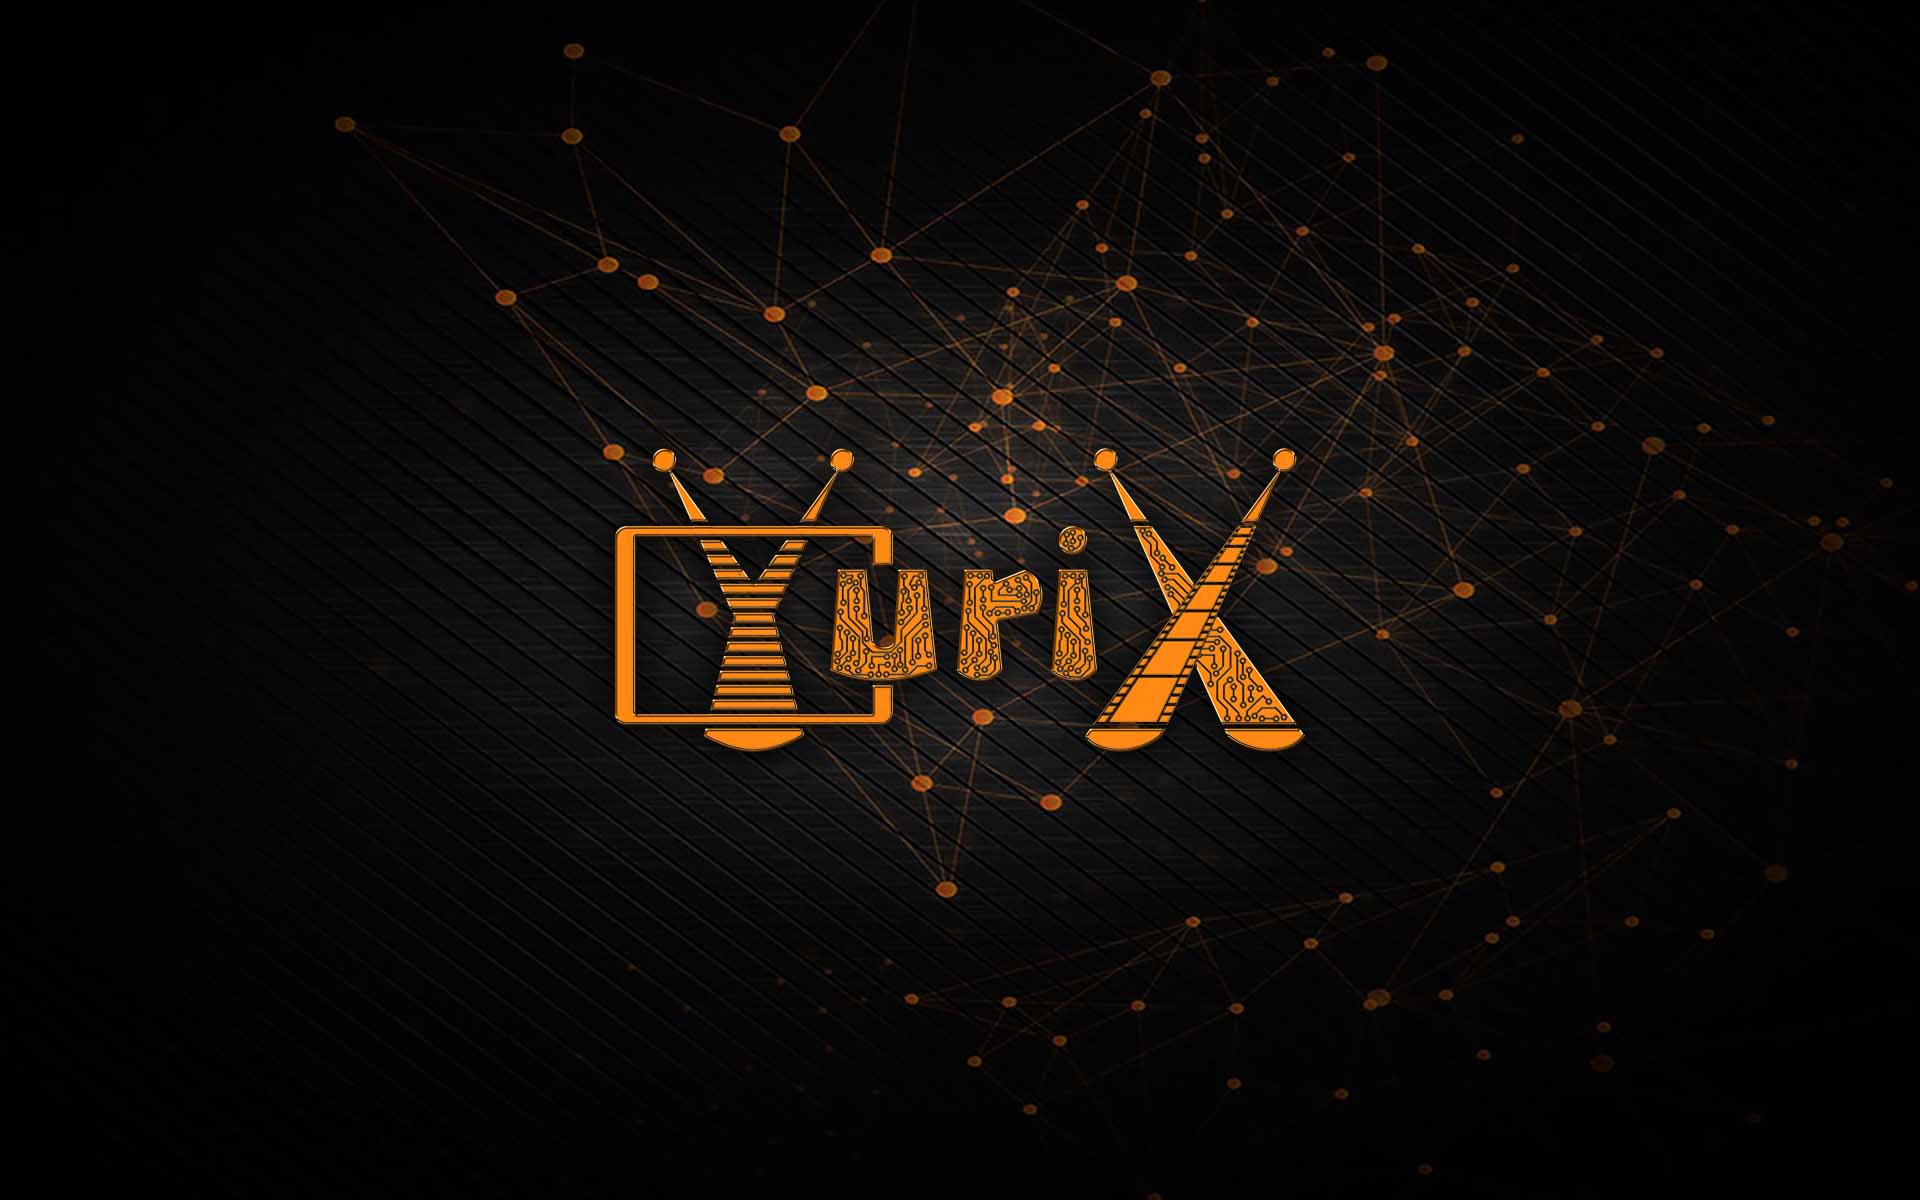 Yurix Launches ICO Backed By Groundbreaking Video Advertising Platform That Allows The User To Get Paid Cryptocurrency For Watching Sponsored Videos